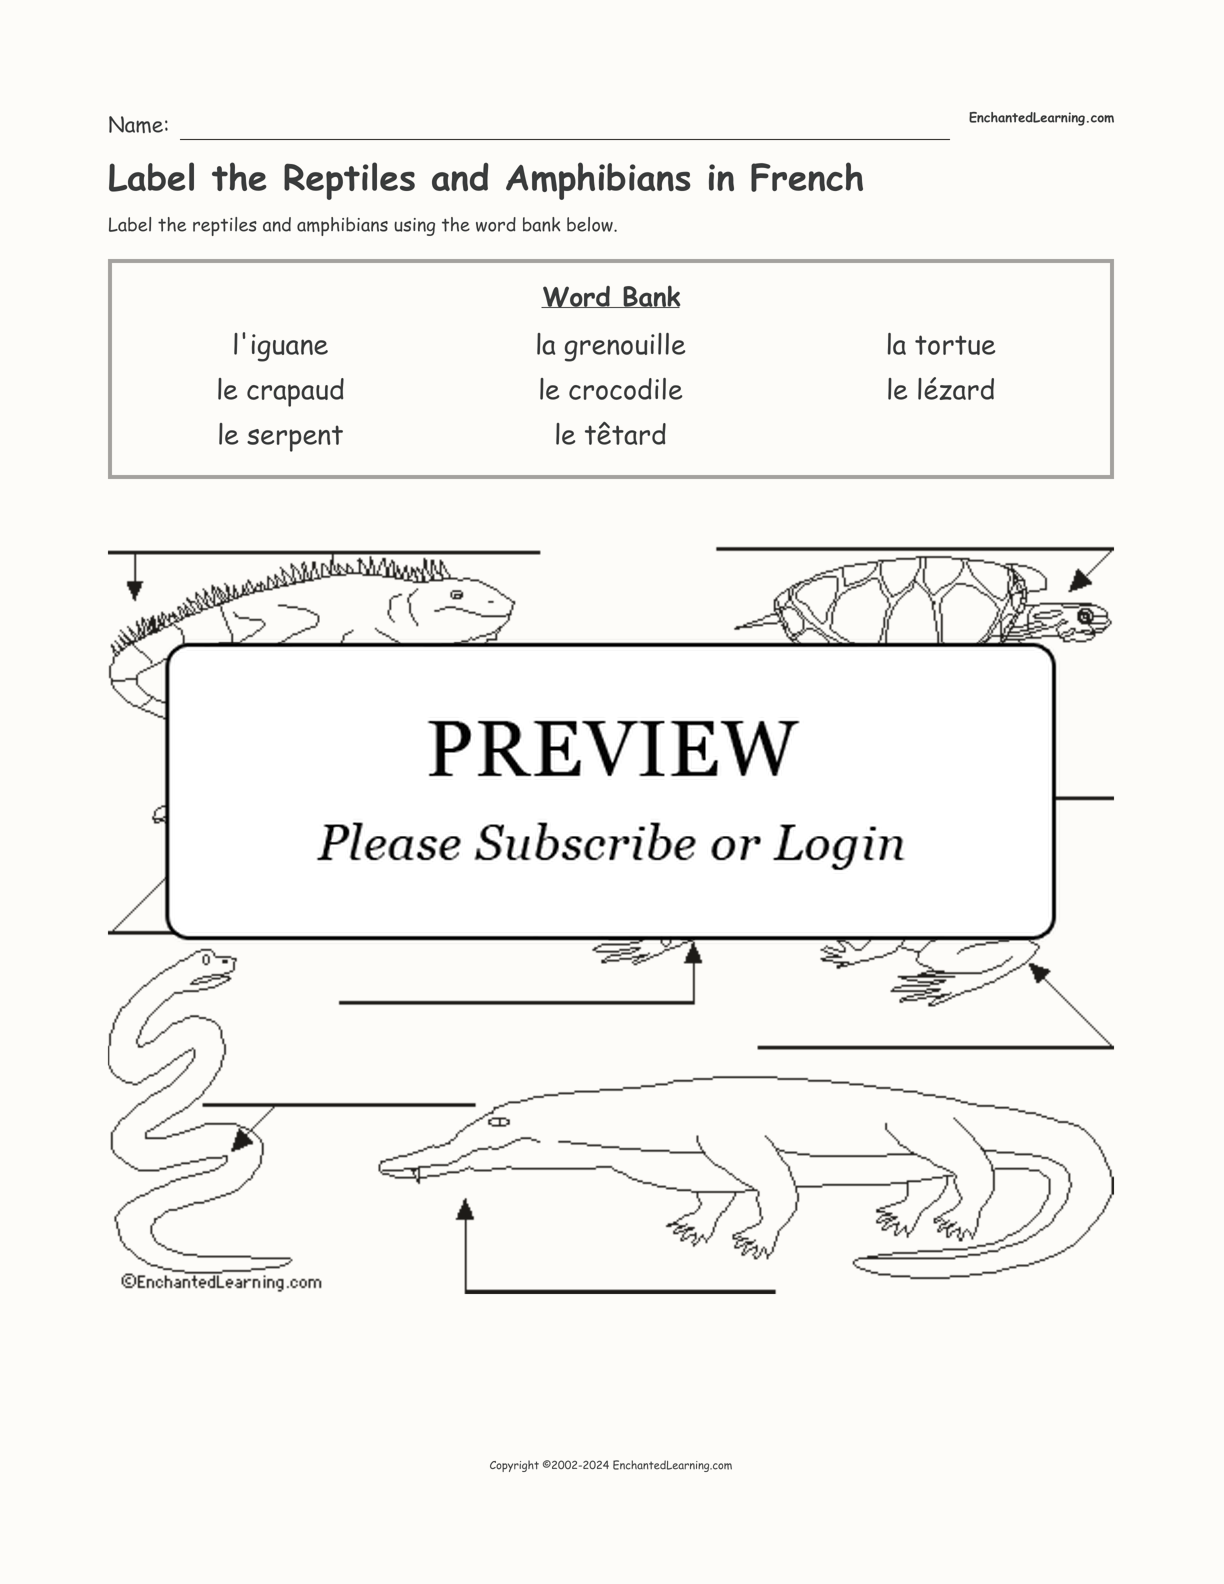 Label the Reptiles and Amphibians in French interactive worksheet page 1